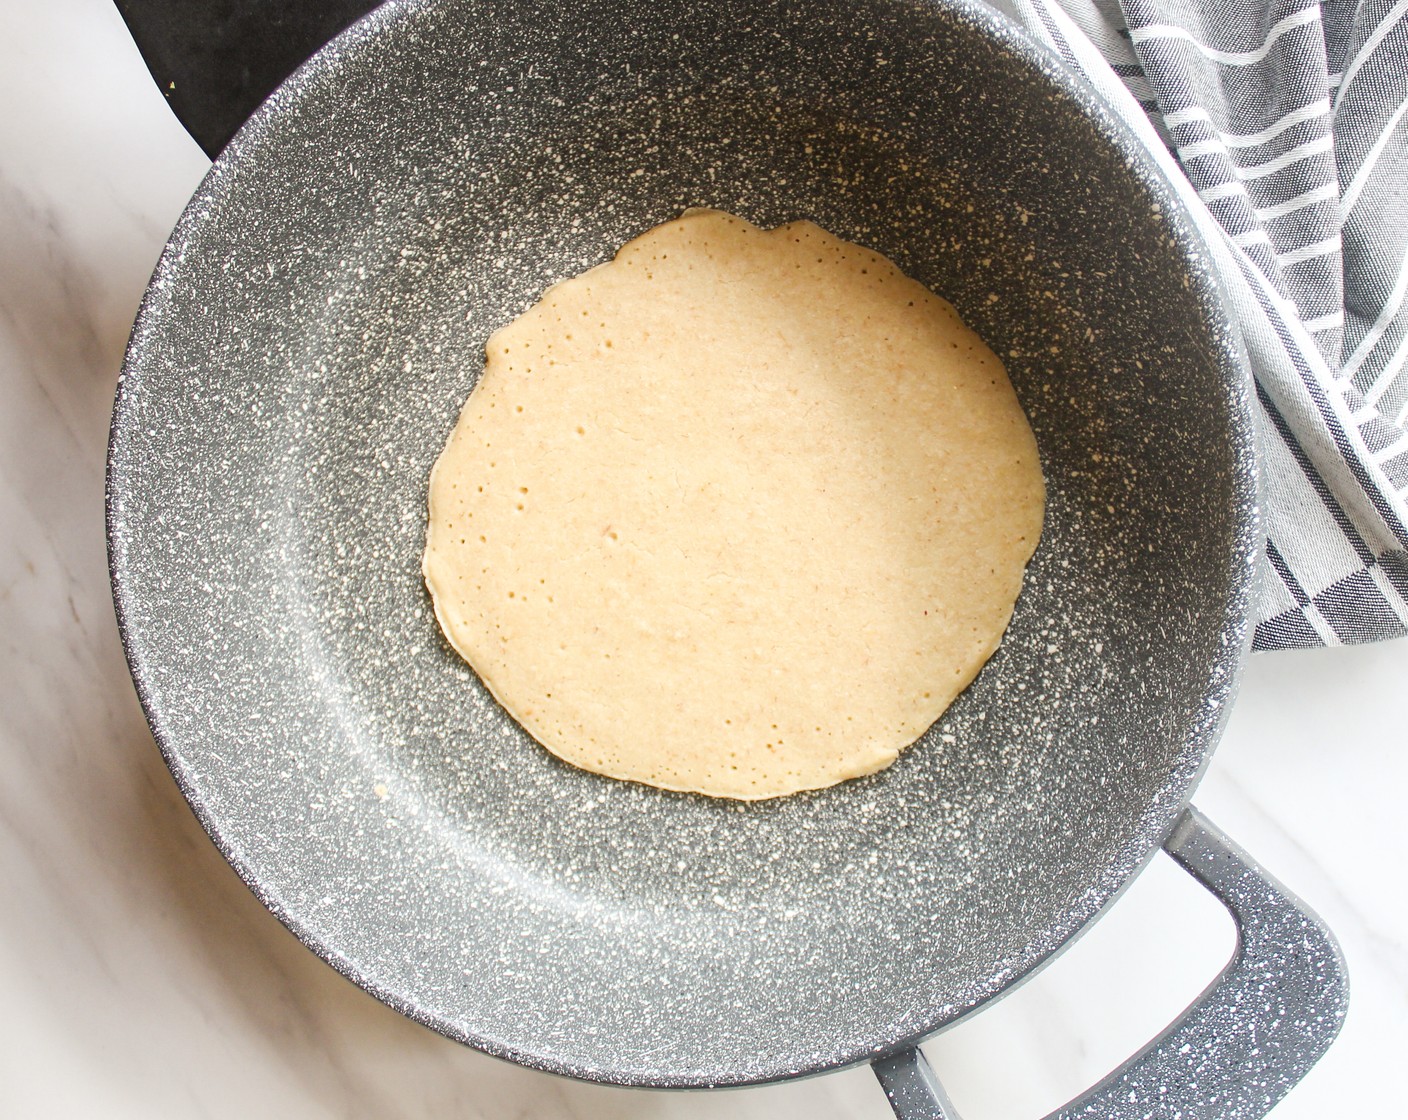 step 4 Pour in ¼ cup of batter into the pan and swirl it immediately so that the batter spreads out. Cook for about 1-2 minutes, or until the batter is fairly dry on top. Then, carefully flip it and cook it on the other side for another 30 seconds.